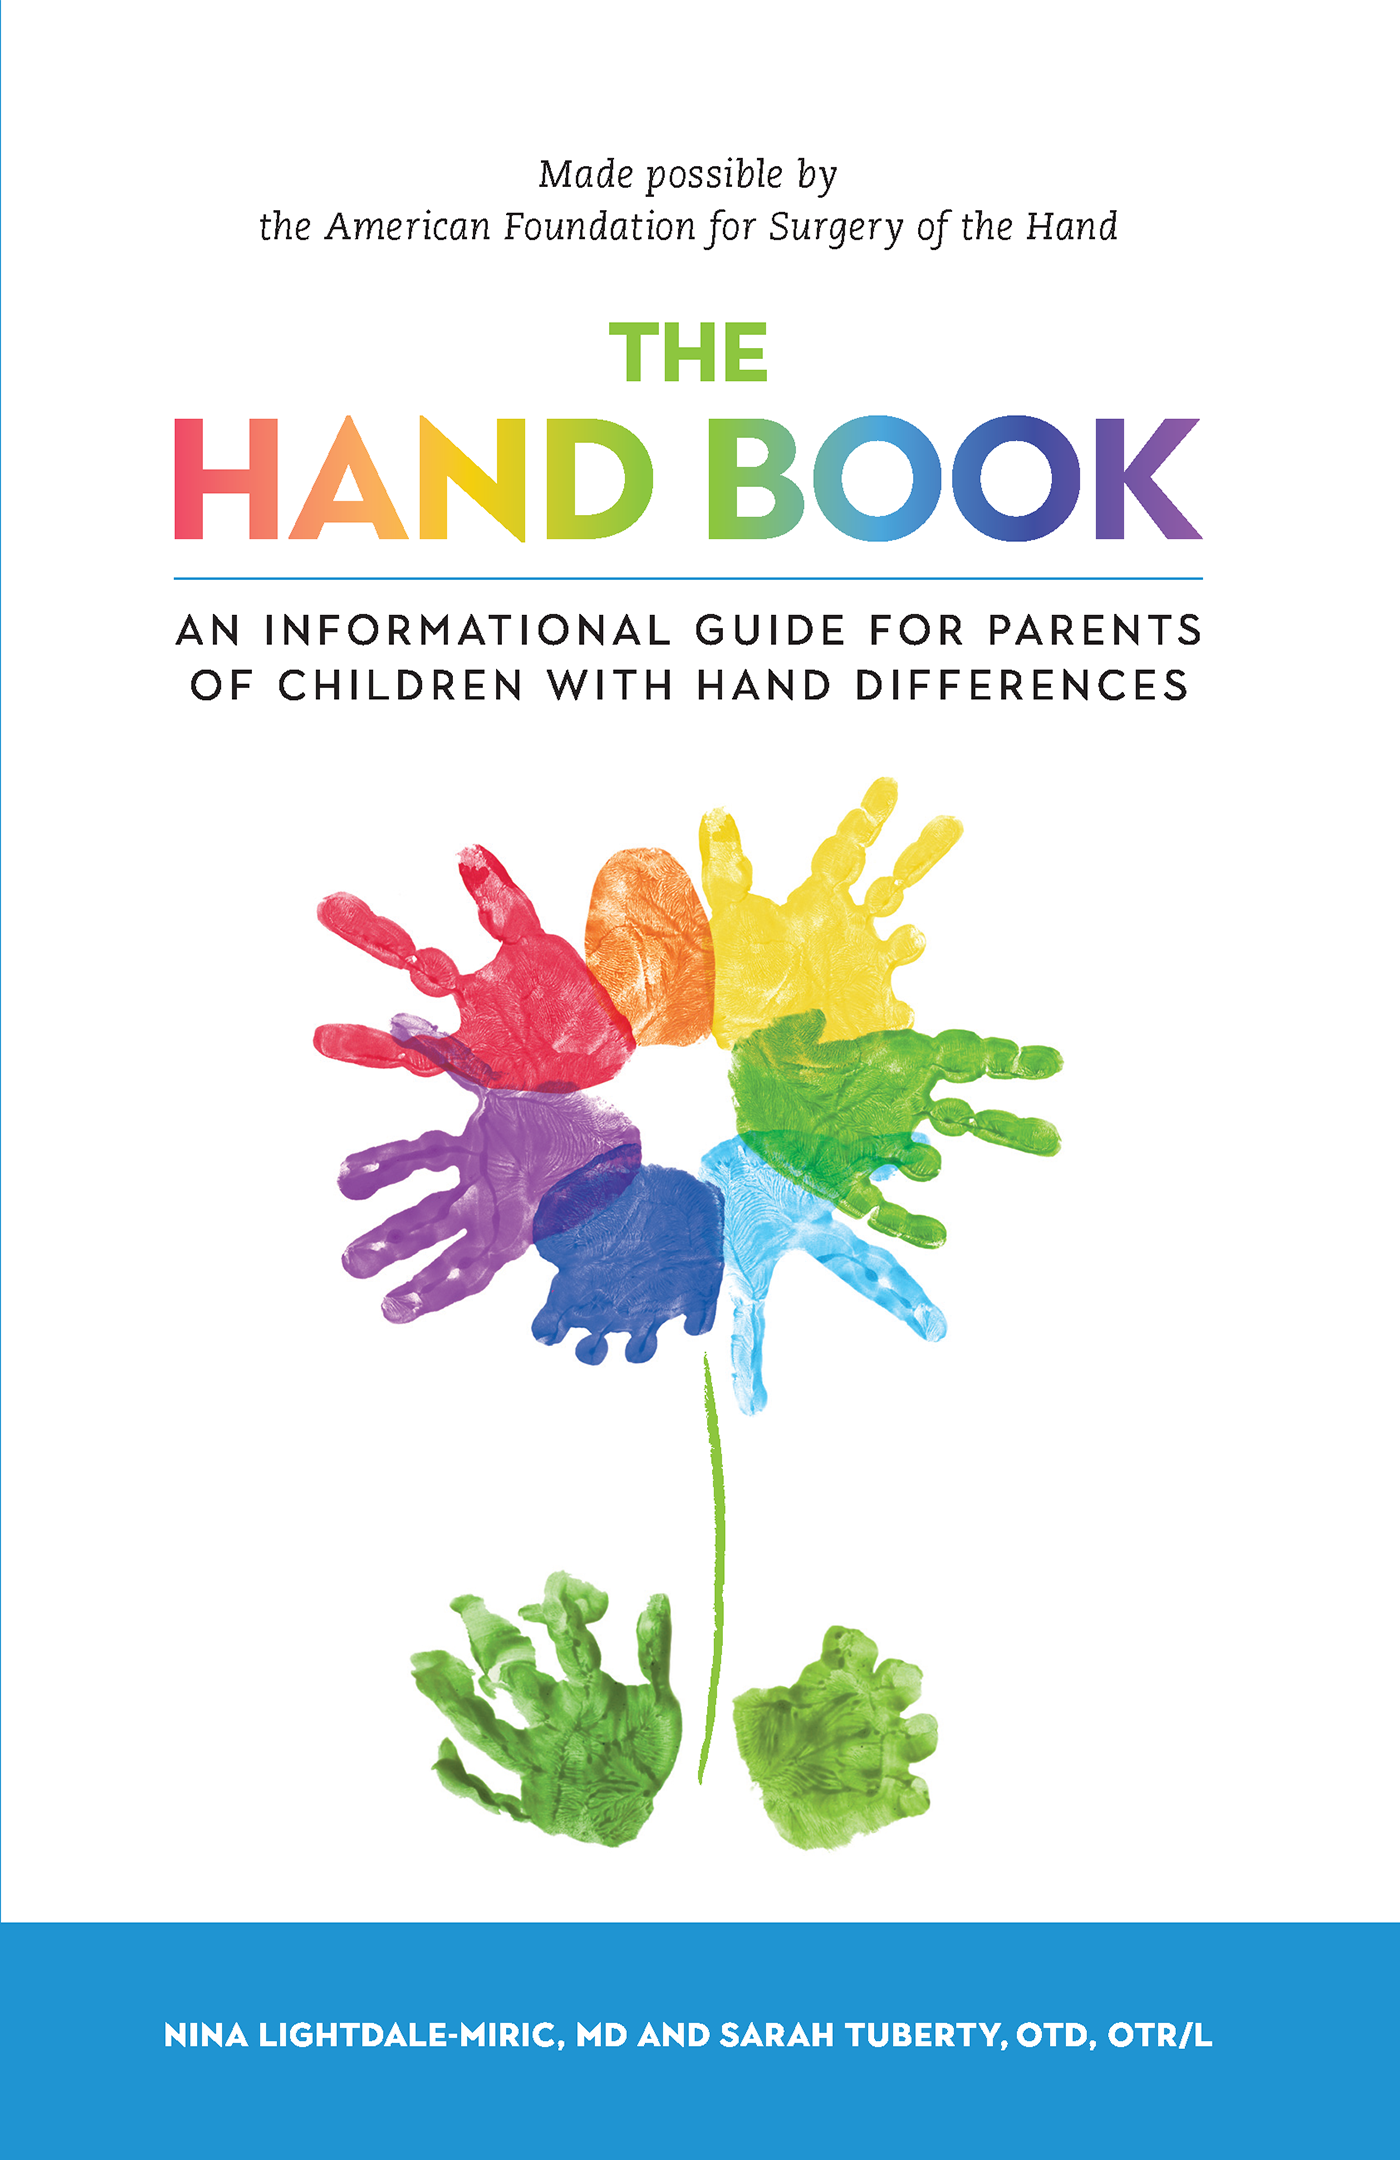 The Hand Book: An Informational Guide for Parents of Children with Hand Differences